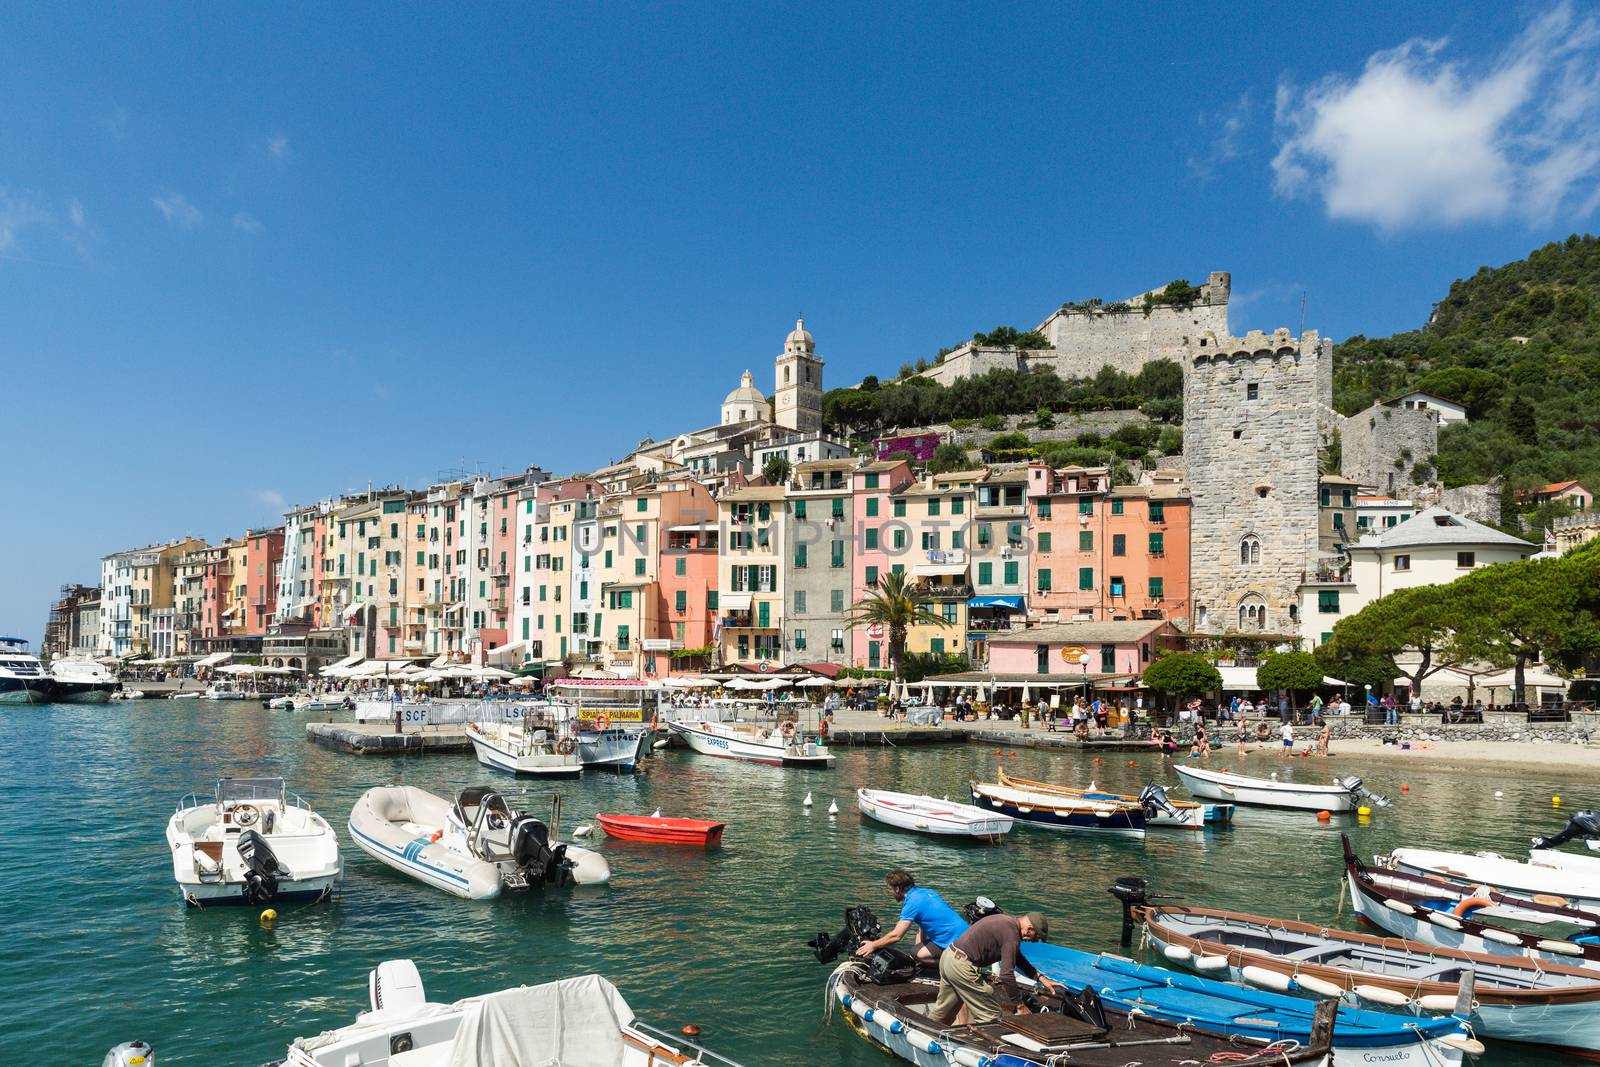 Portovenere in the Ligurian region of Italy by chrisukphoto